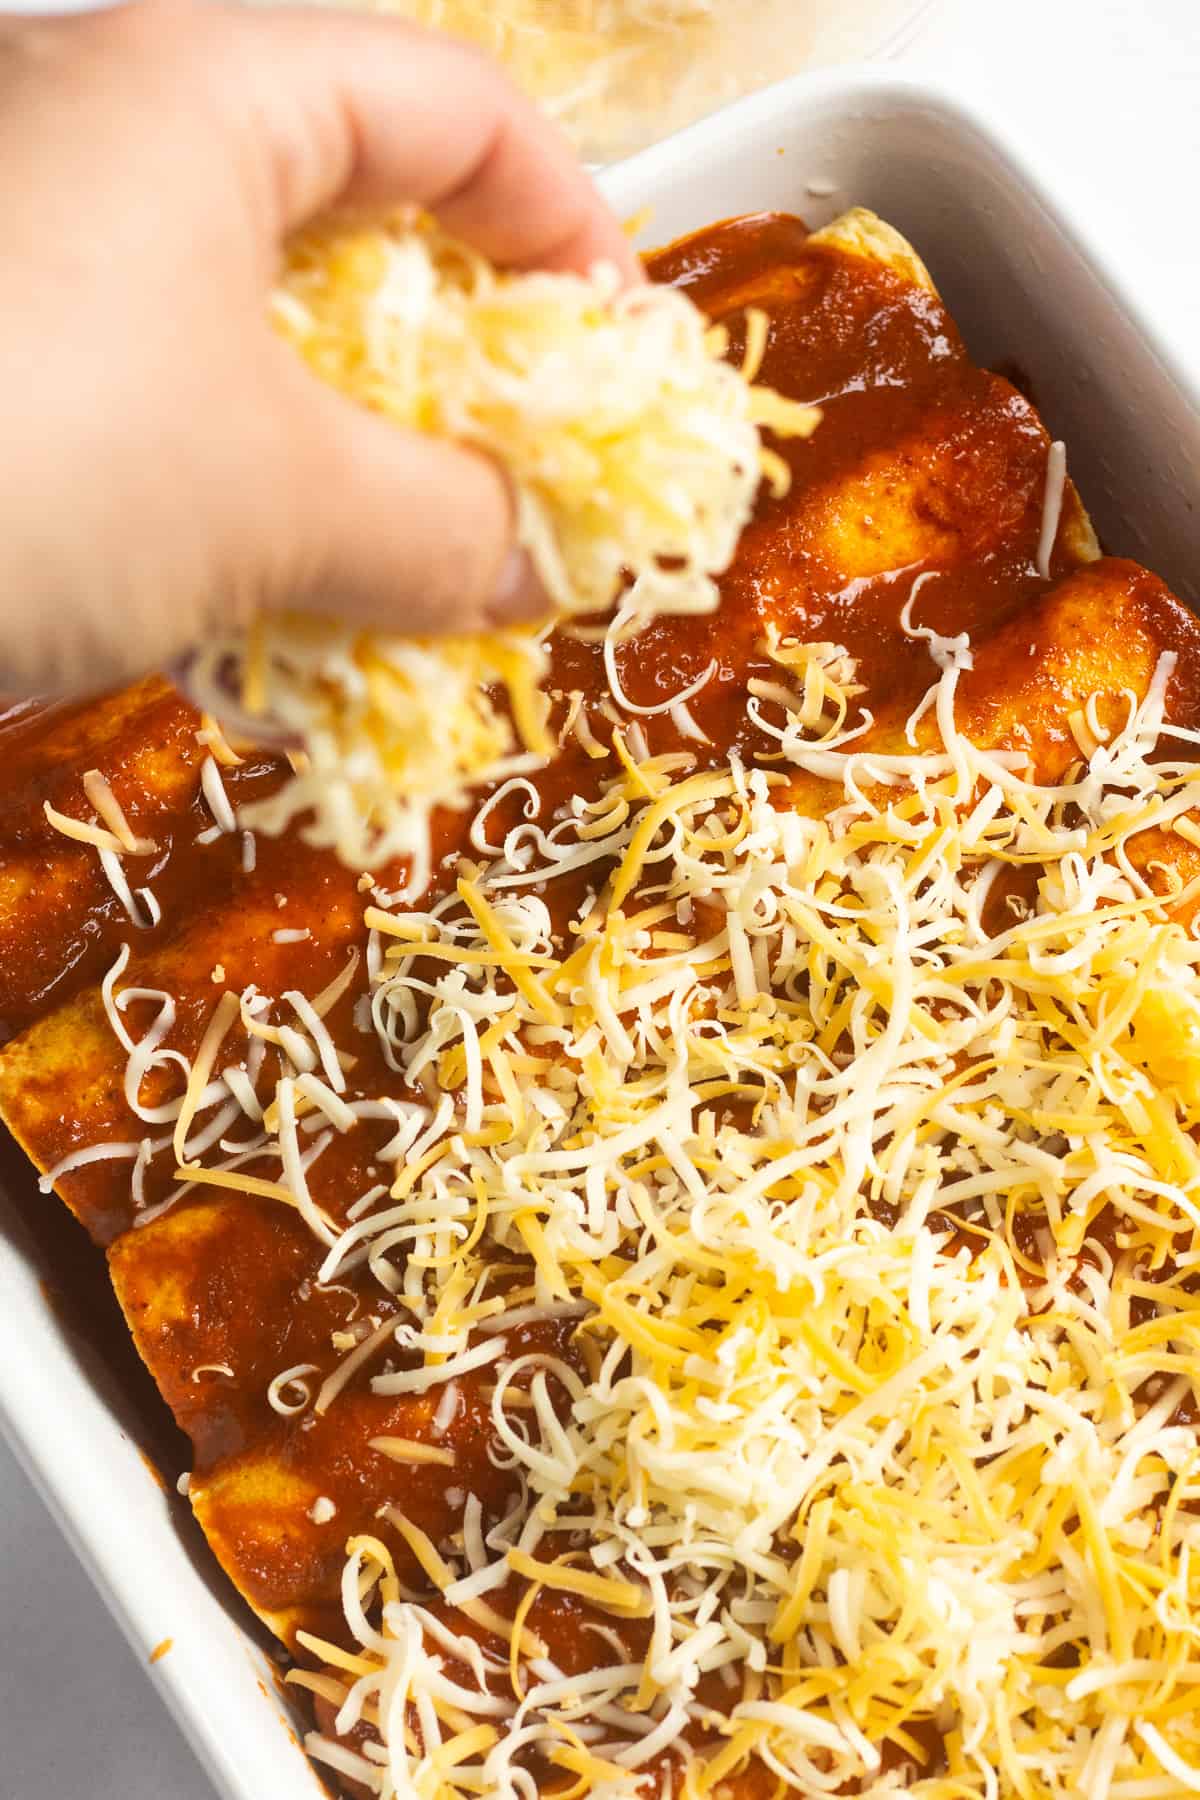 A hand sprinkling cheese over sauced rolled tortillas in a casserole dish.